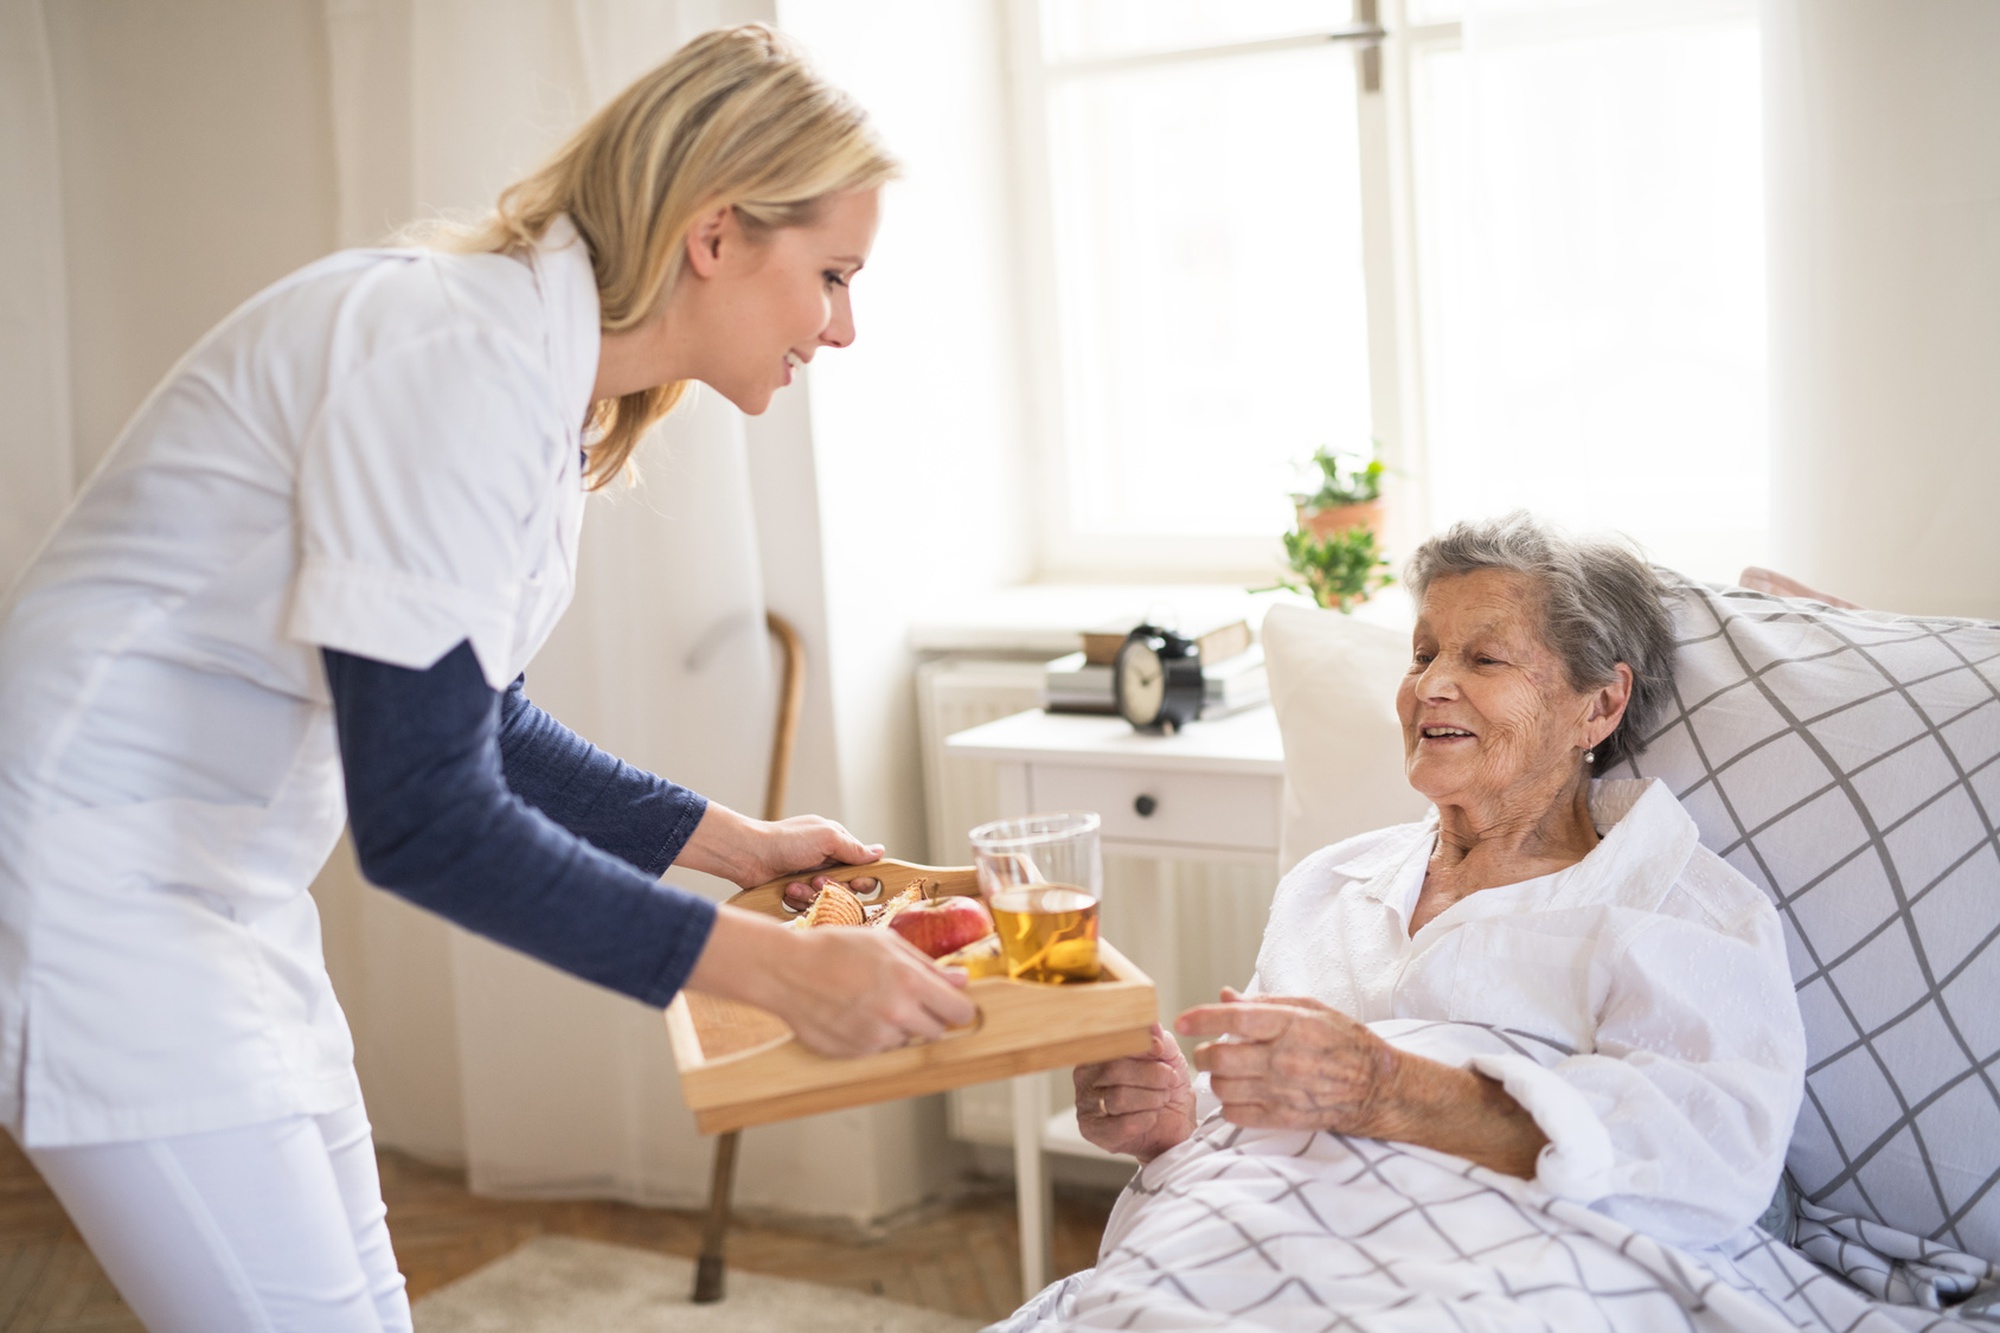 Why Use Home Care Agency Software?